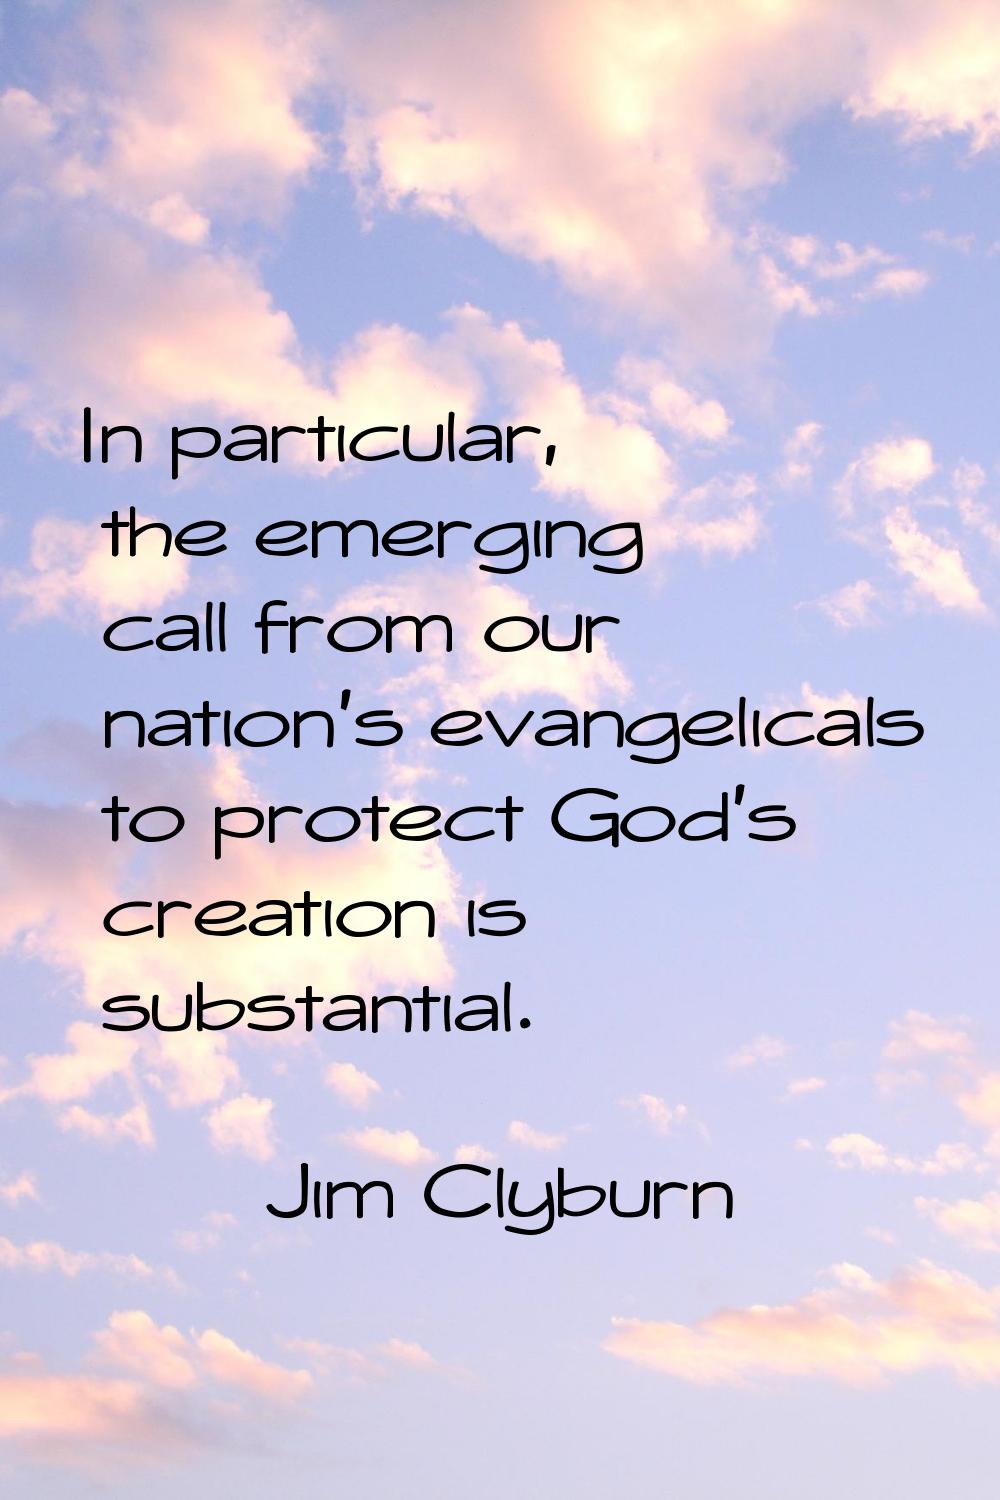 In particular, the emerging call from our nation's evangelicals to protect God's creation is substa